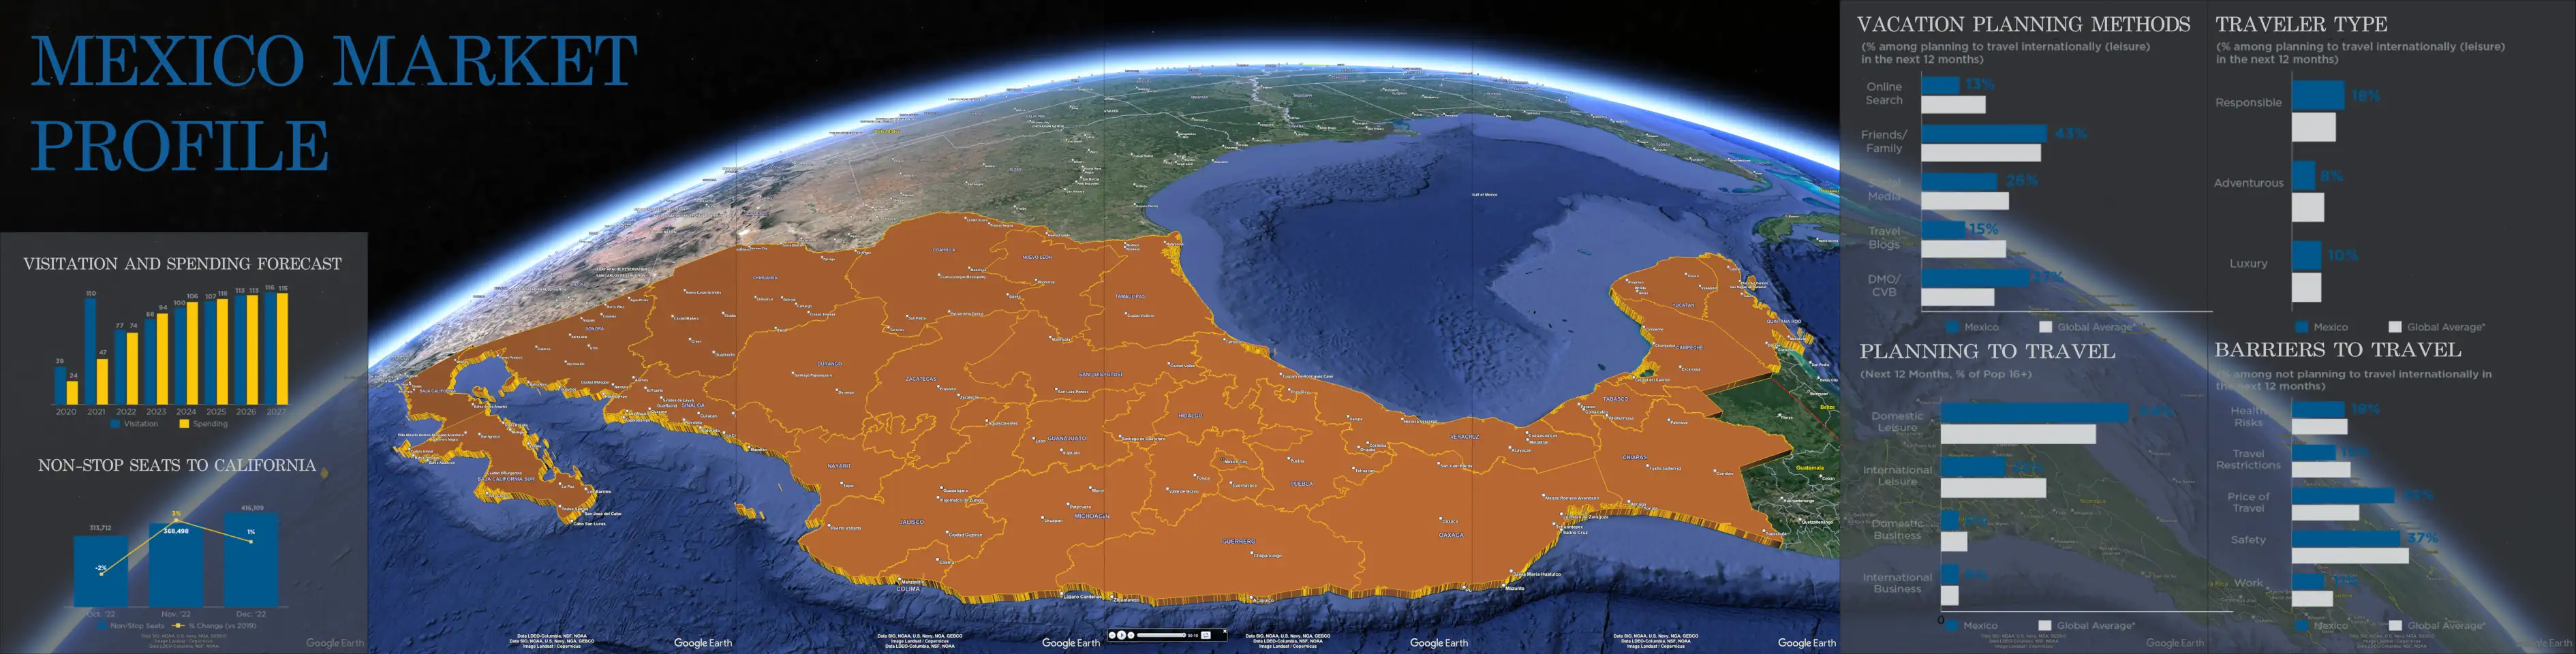 A wide screenshot of a presentation on the VisionPort, titled “Mexico Market Profile”. A 3D view of earth, zoomed so that Mexico takes most of the view, highlighted in orange with its states labeled and separated by border lines. To the left and right of the globe are semi-transparent popups displaying statistics, each with a bar-chart breakdown of data: Visitation and spending forecast with visitation and spending; non-stop seats to California; vacation planning methods; planning to travel; traveler type; barriers to travel.